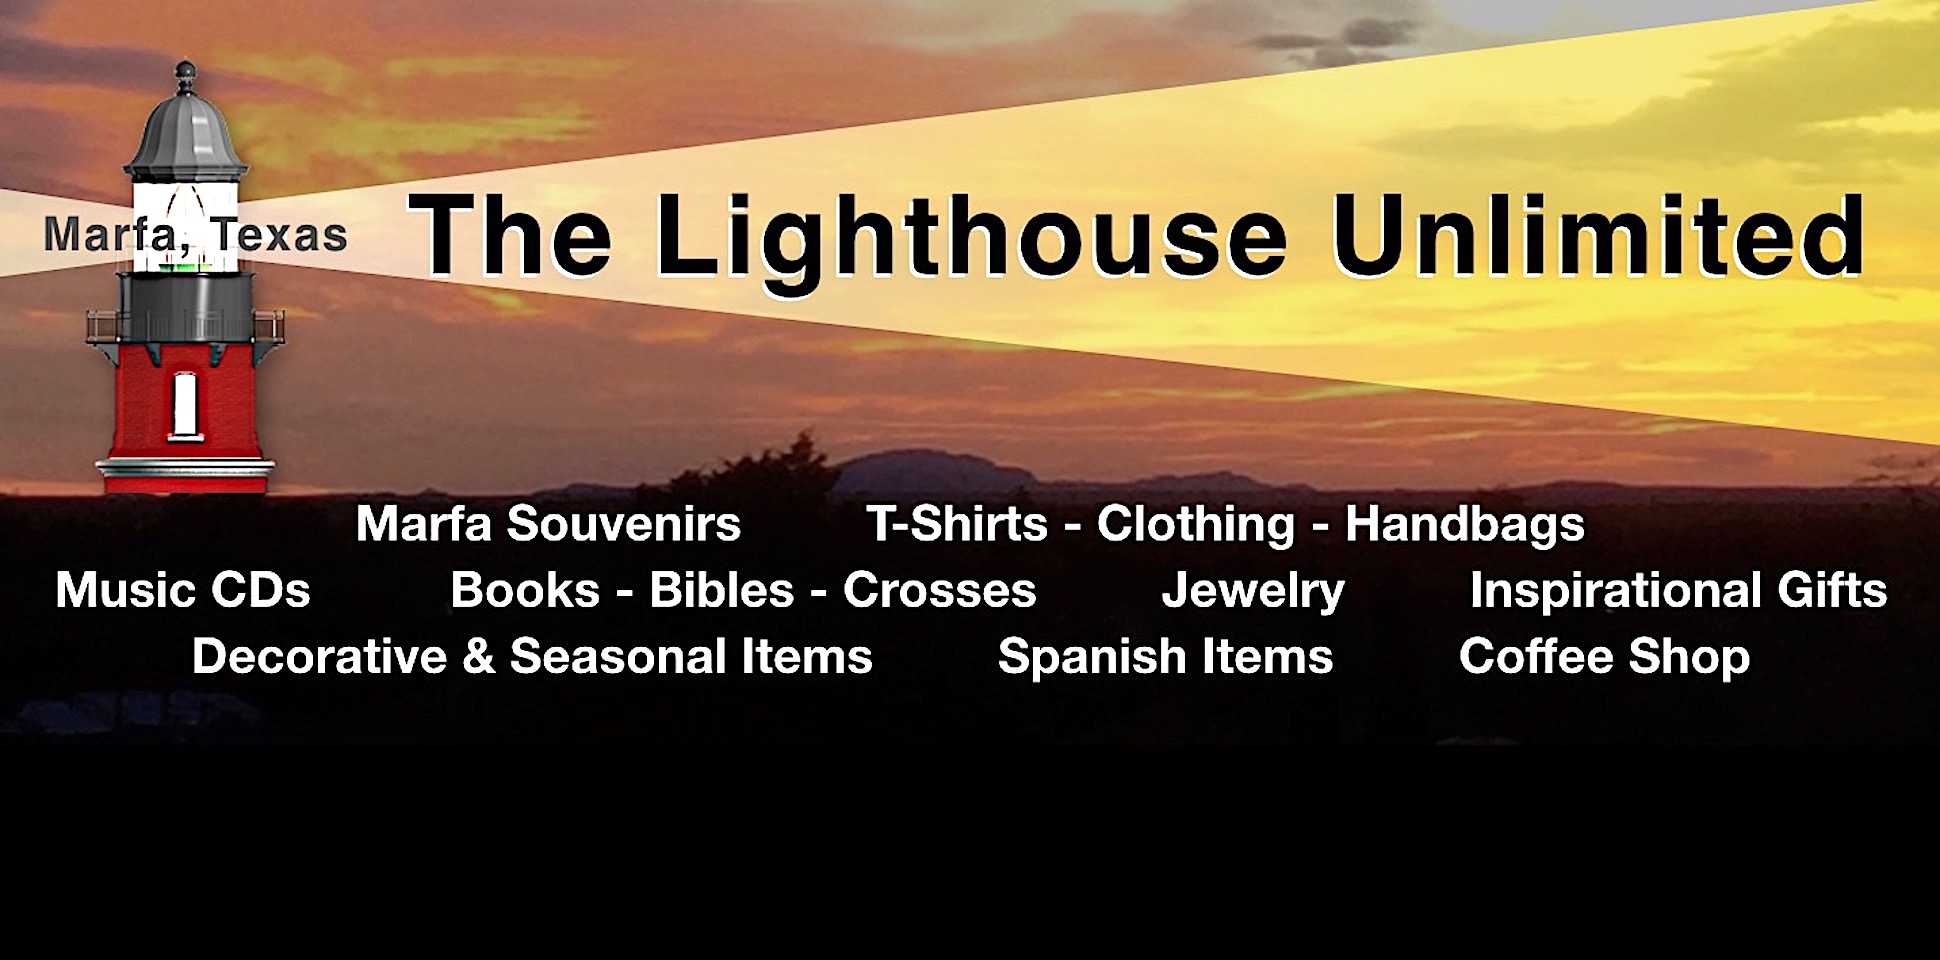 The Lighthouse Unlimited